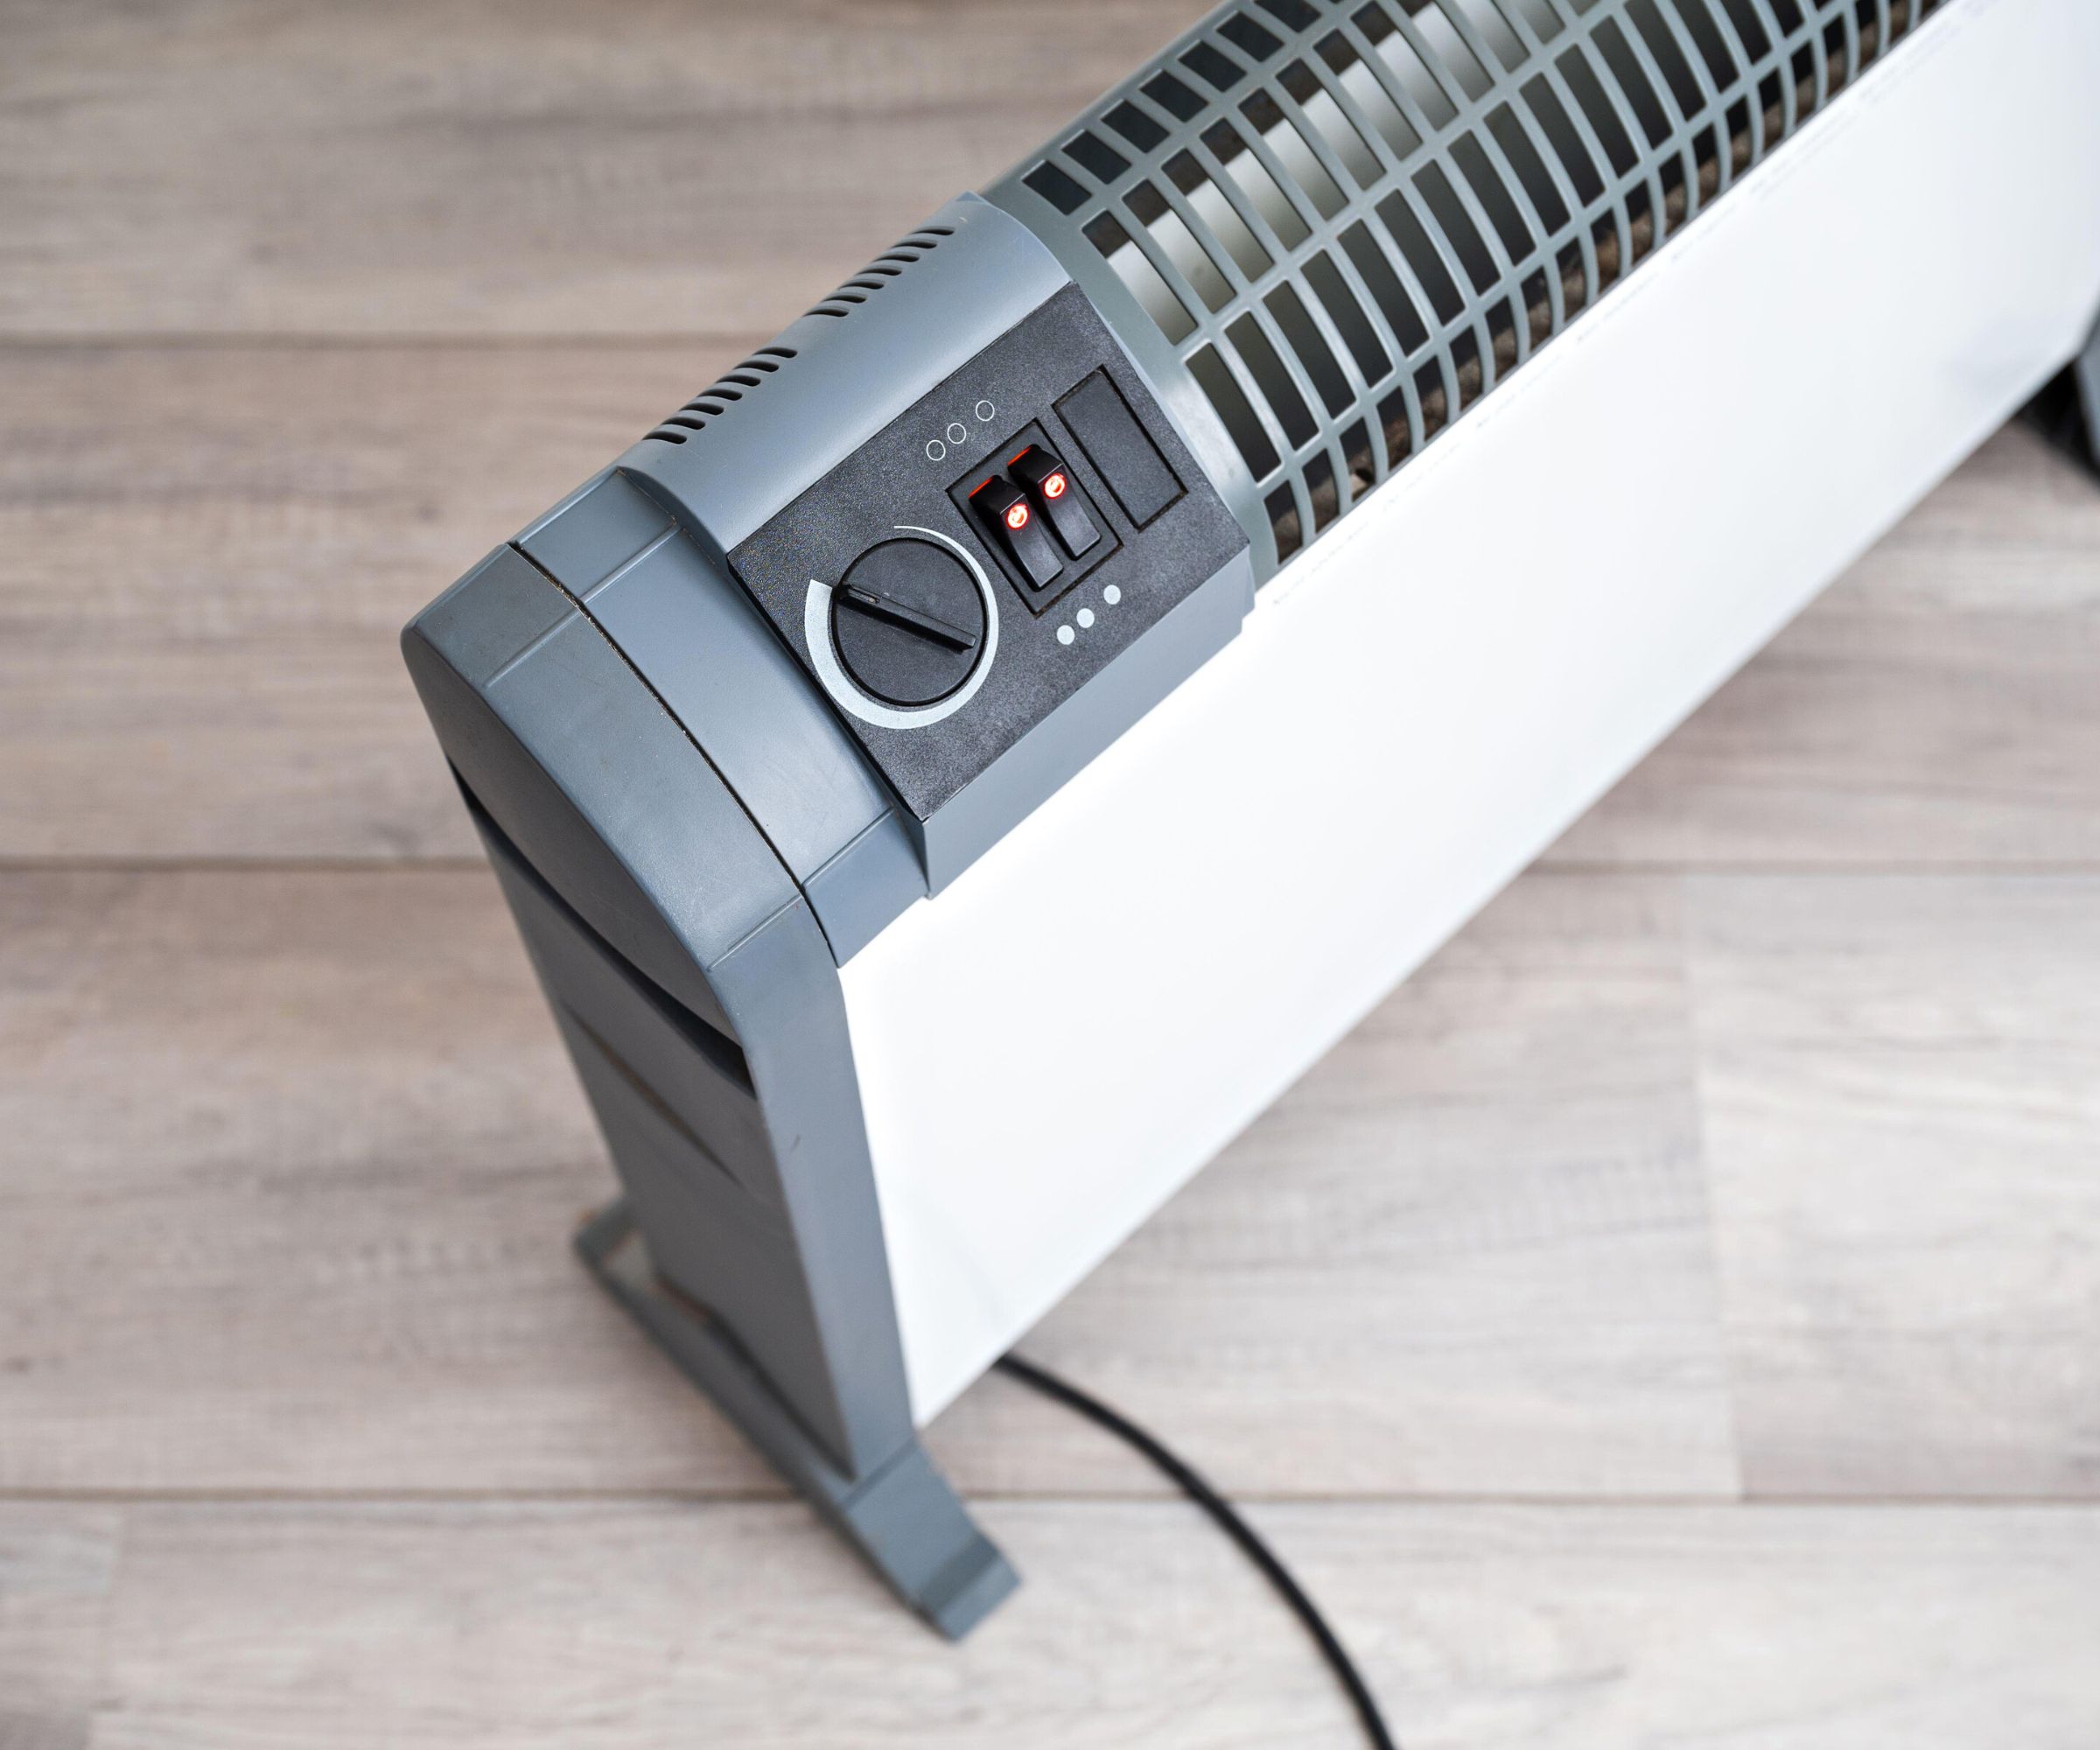 What are the best types of space heater for warmth and cost